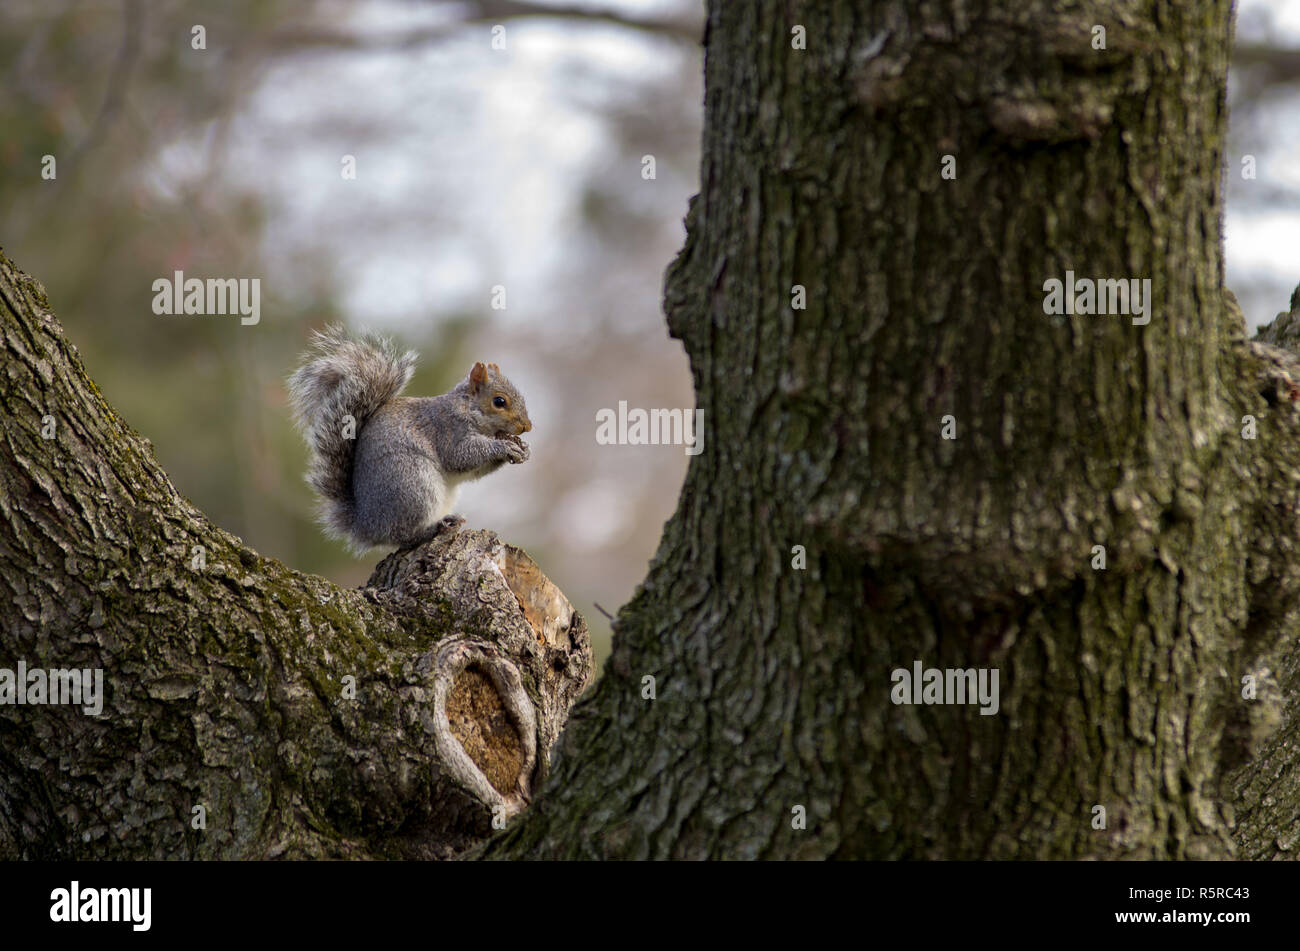 Squirrel on a tree nibbling a walnut. Stock Photo